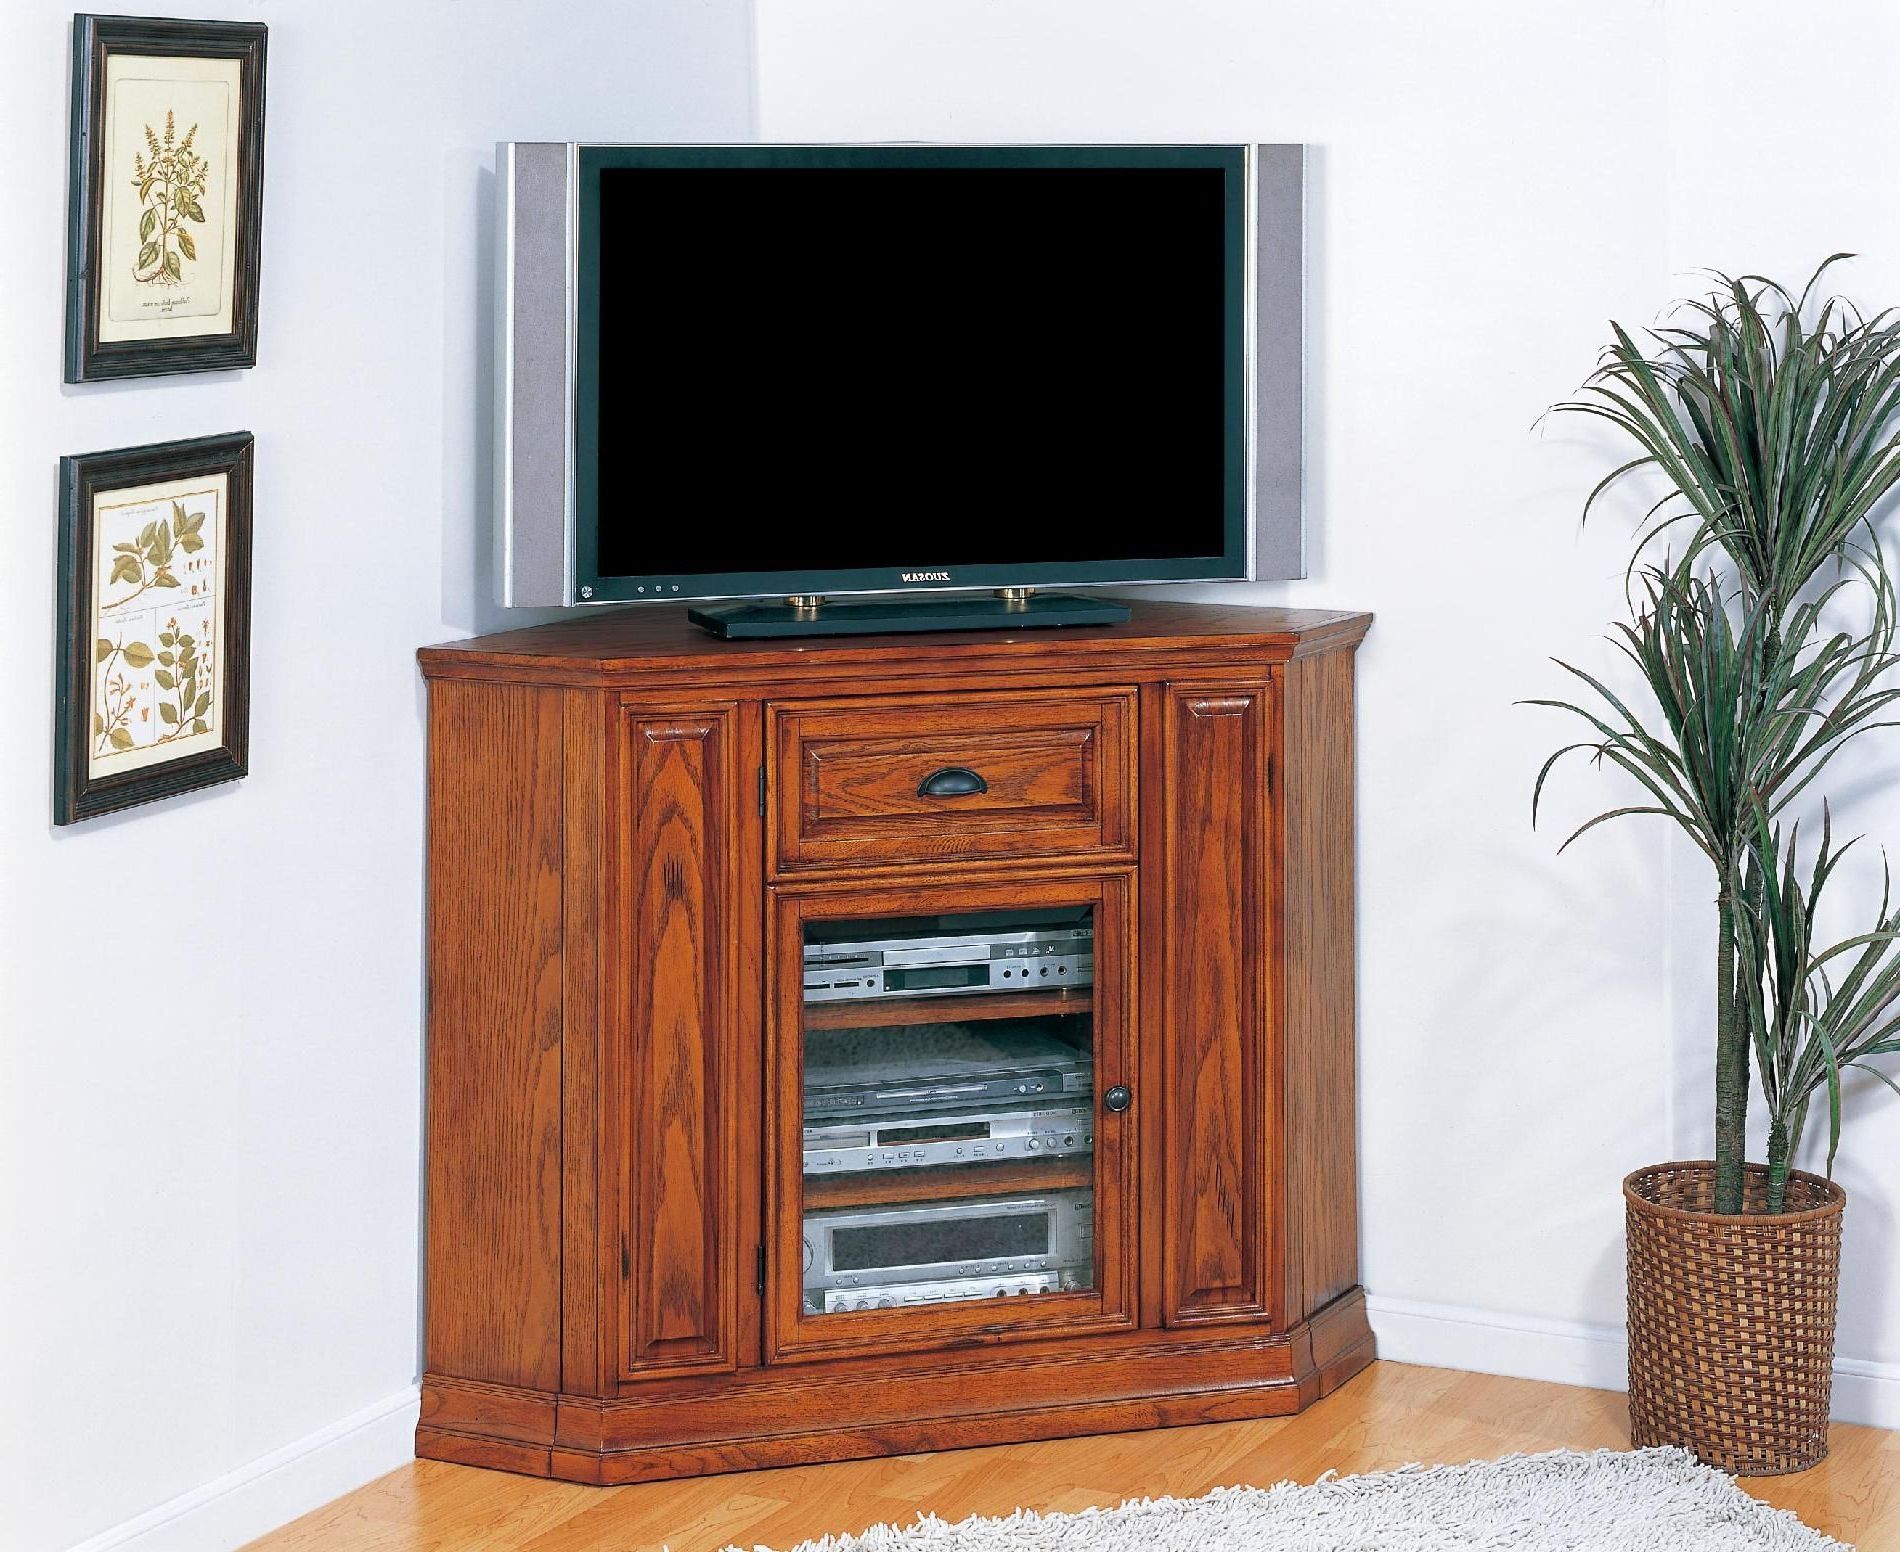 Http://advice Tips In Corner Tv Cabinets For Flat Screens With Doors (View 14 of 20)